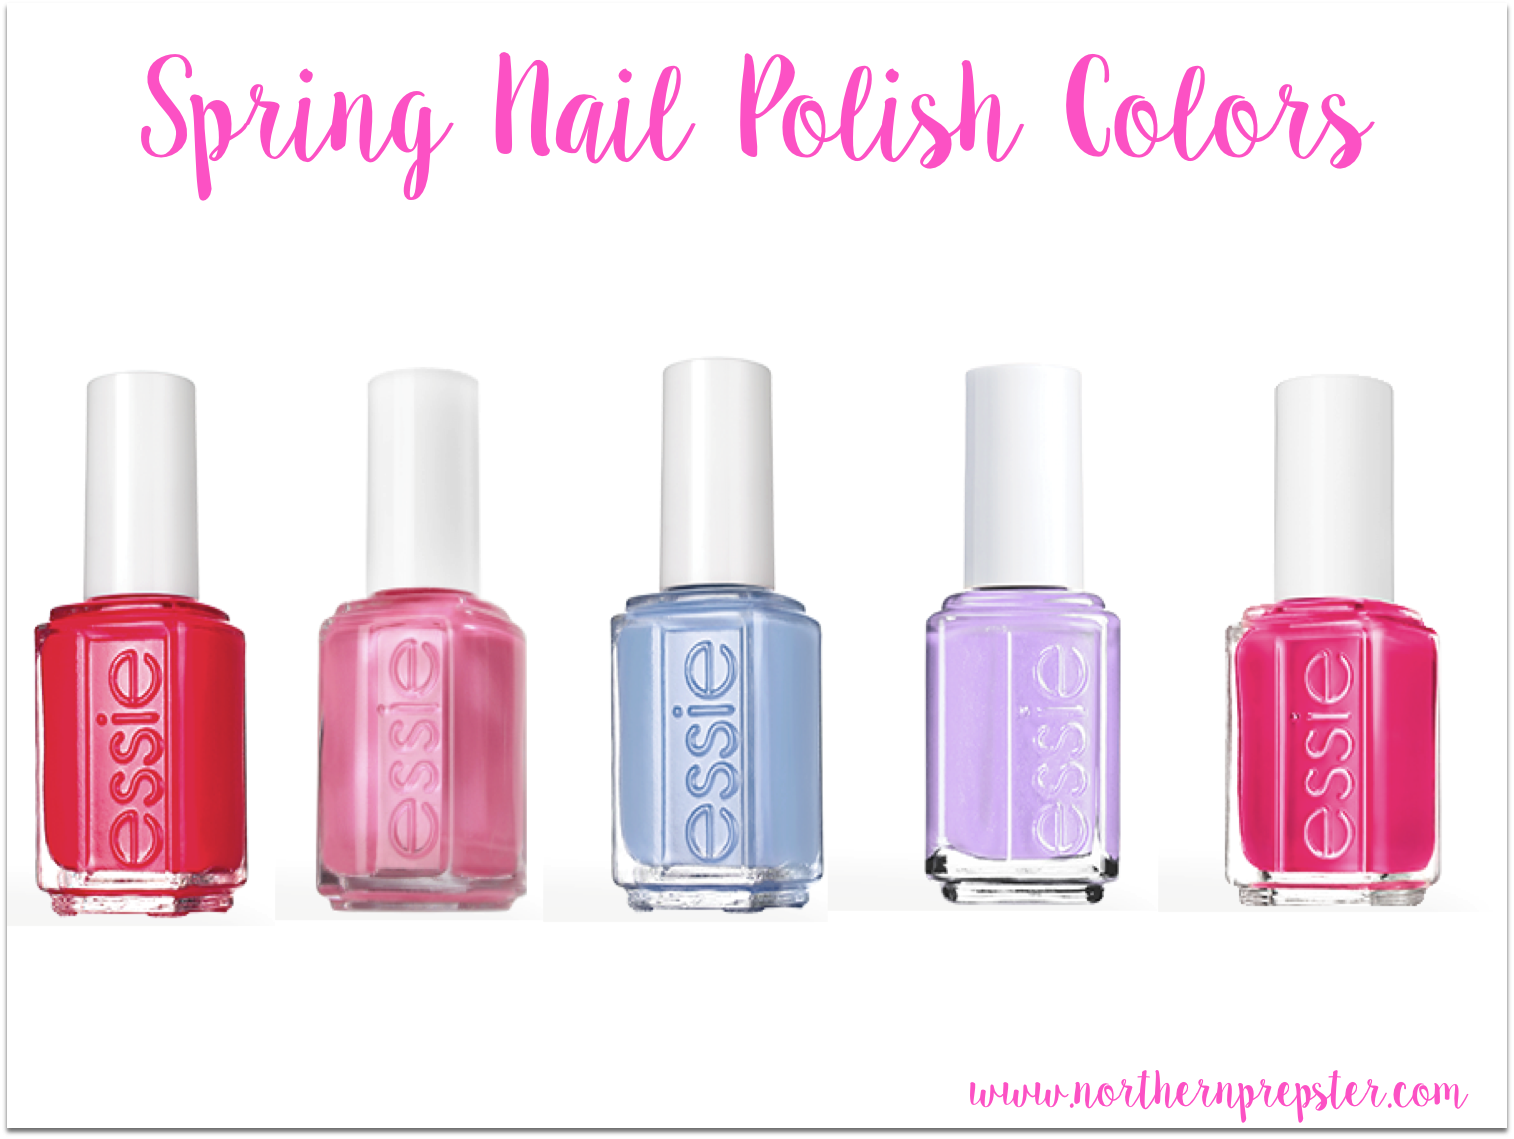 Entity 1 Gel Nail Polish Colors for Spring - wide 7